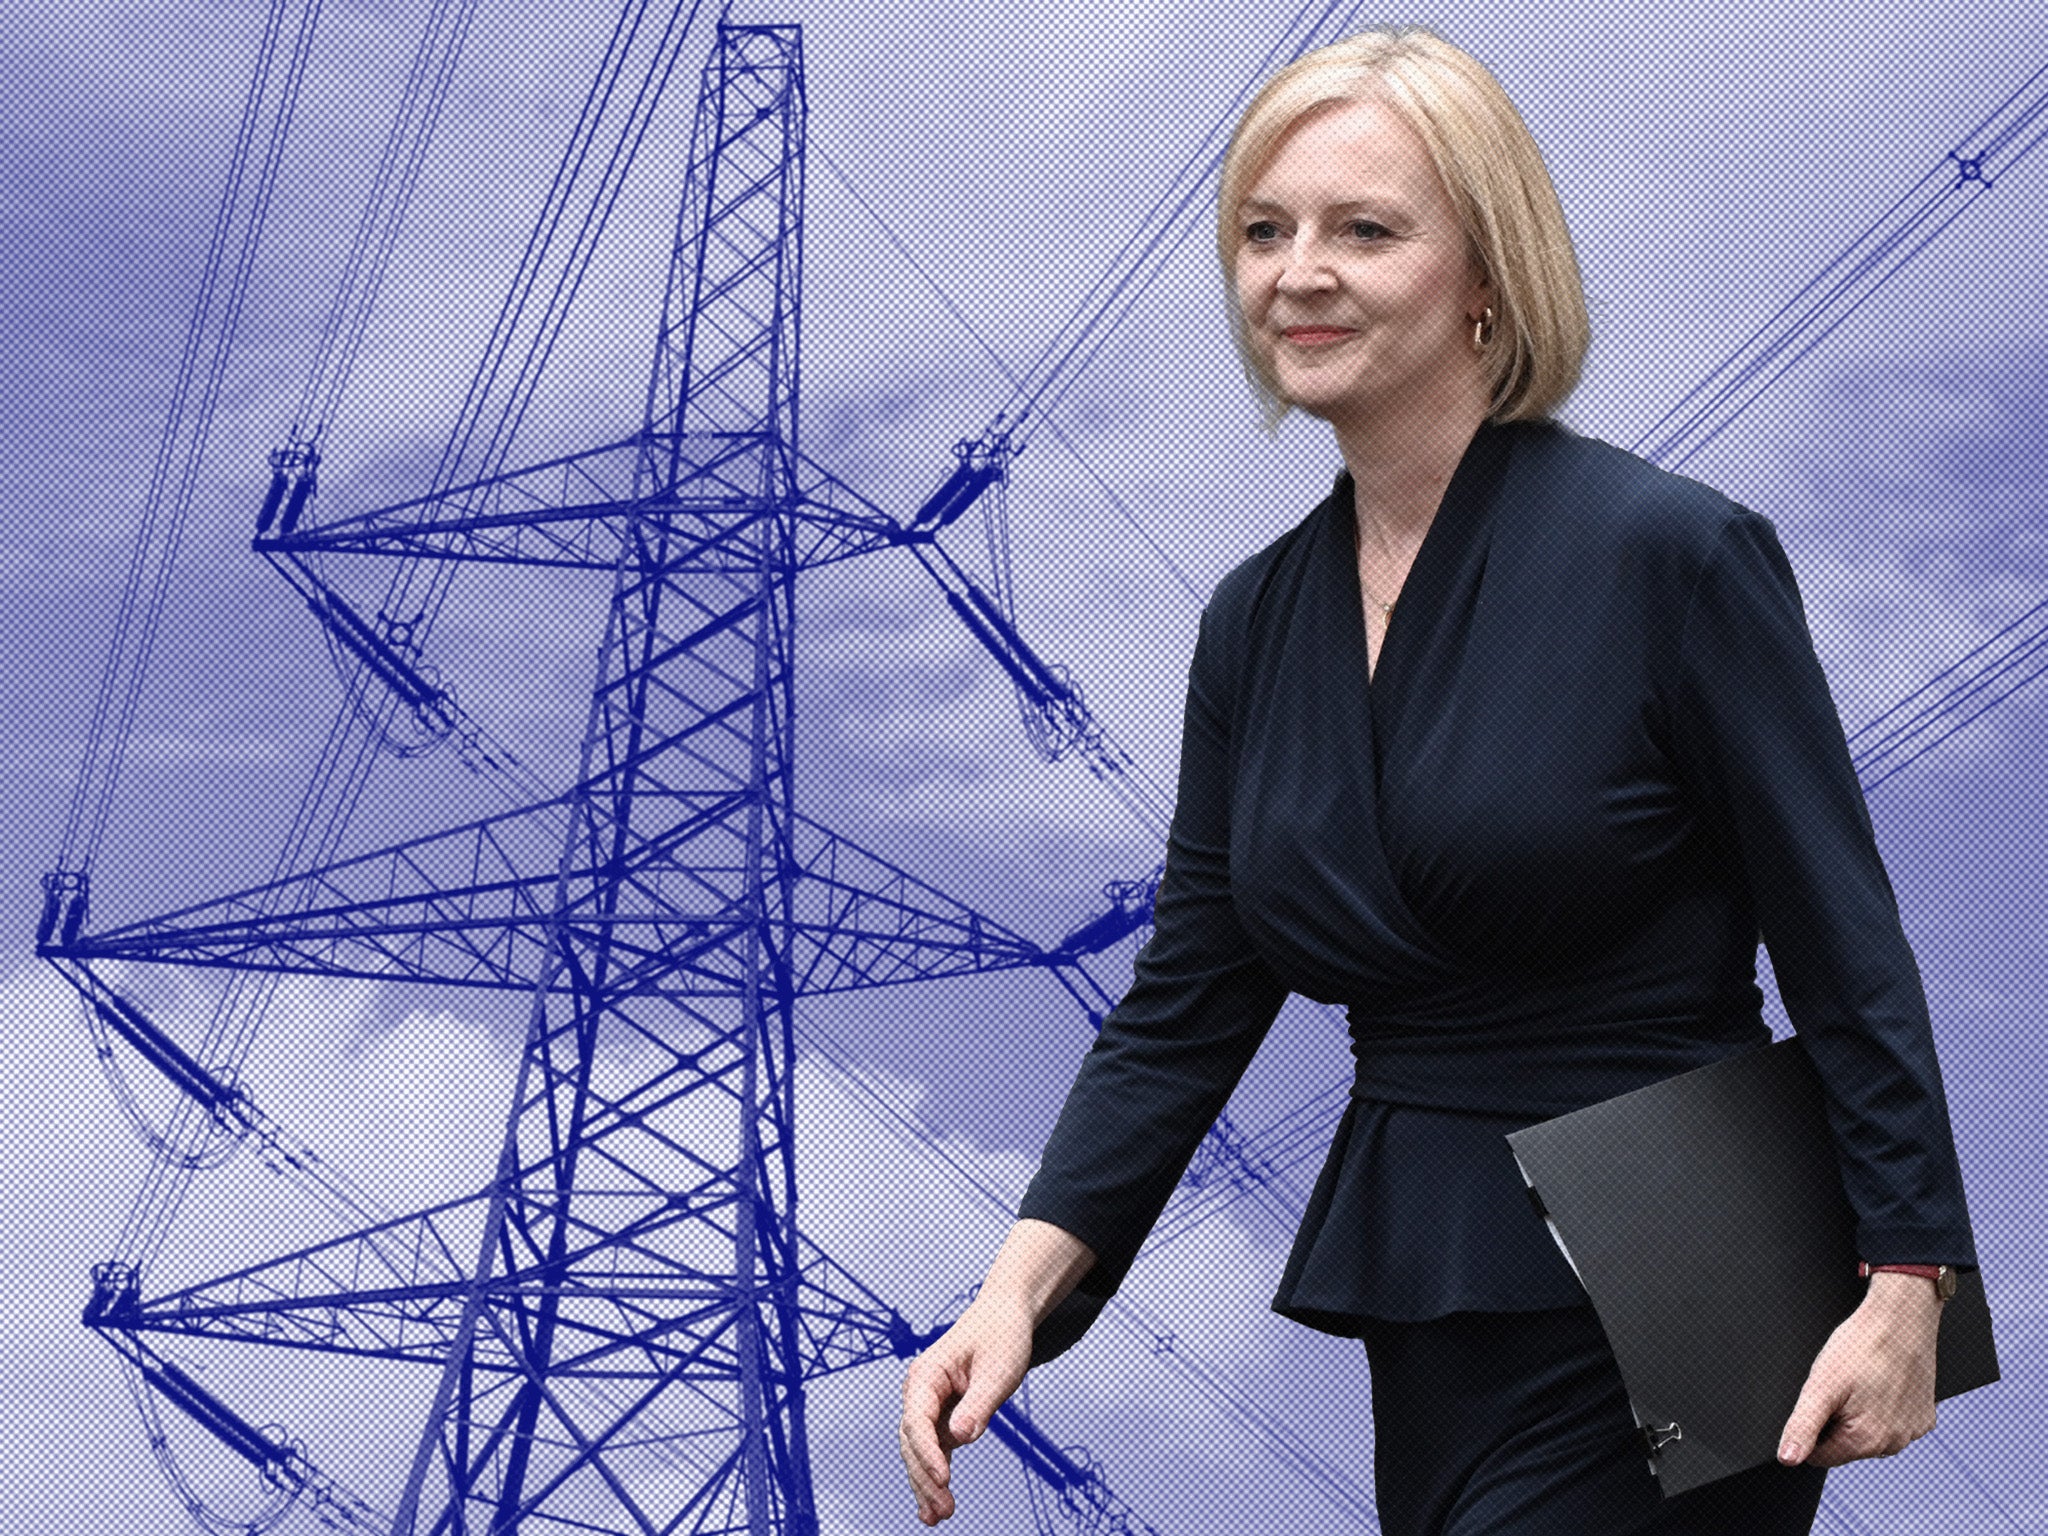 They won’t power up Britain’s lagging GDP, whatever Truss thinks